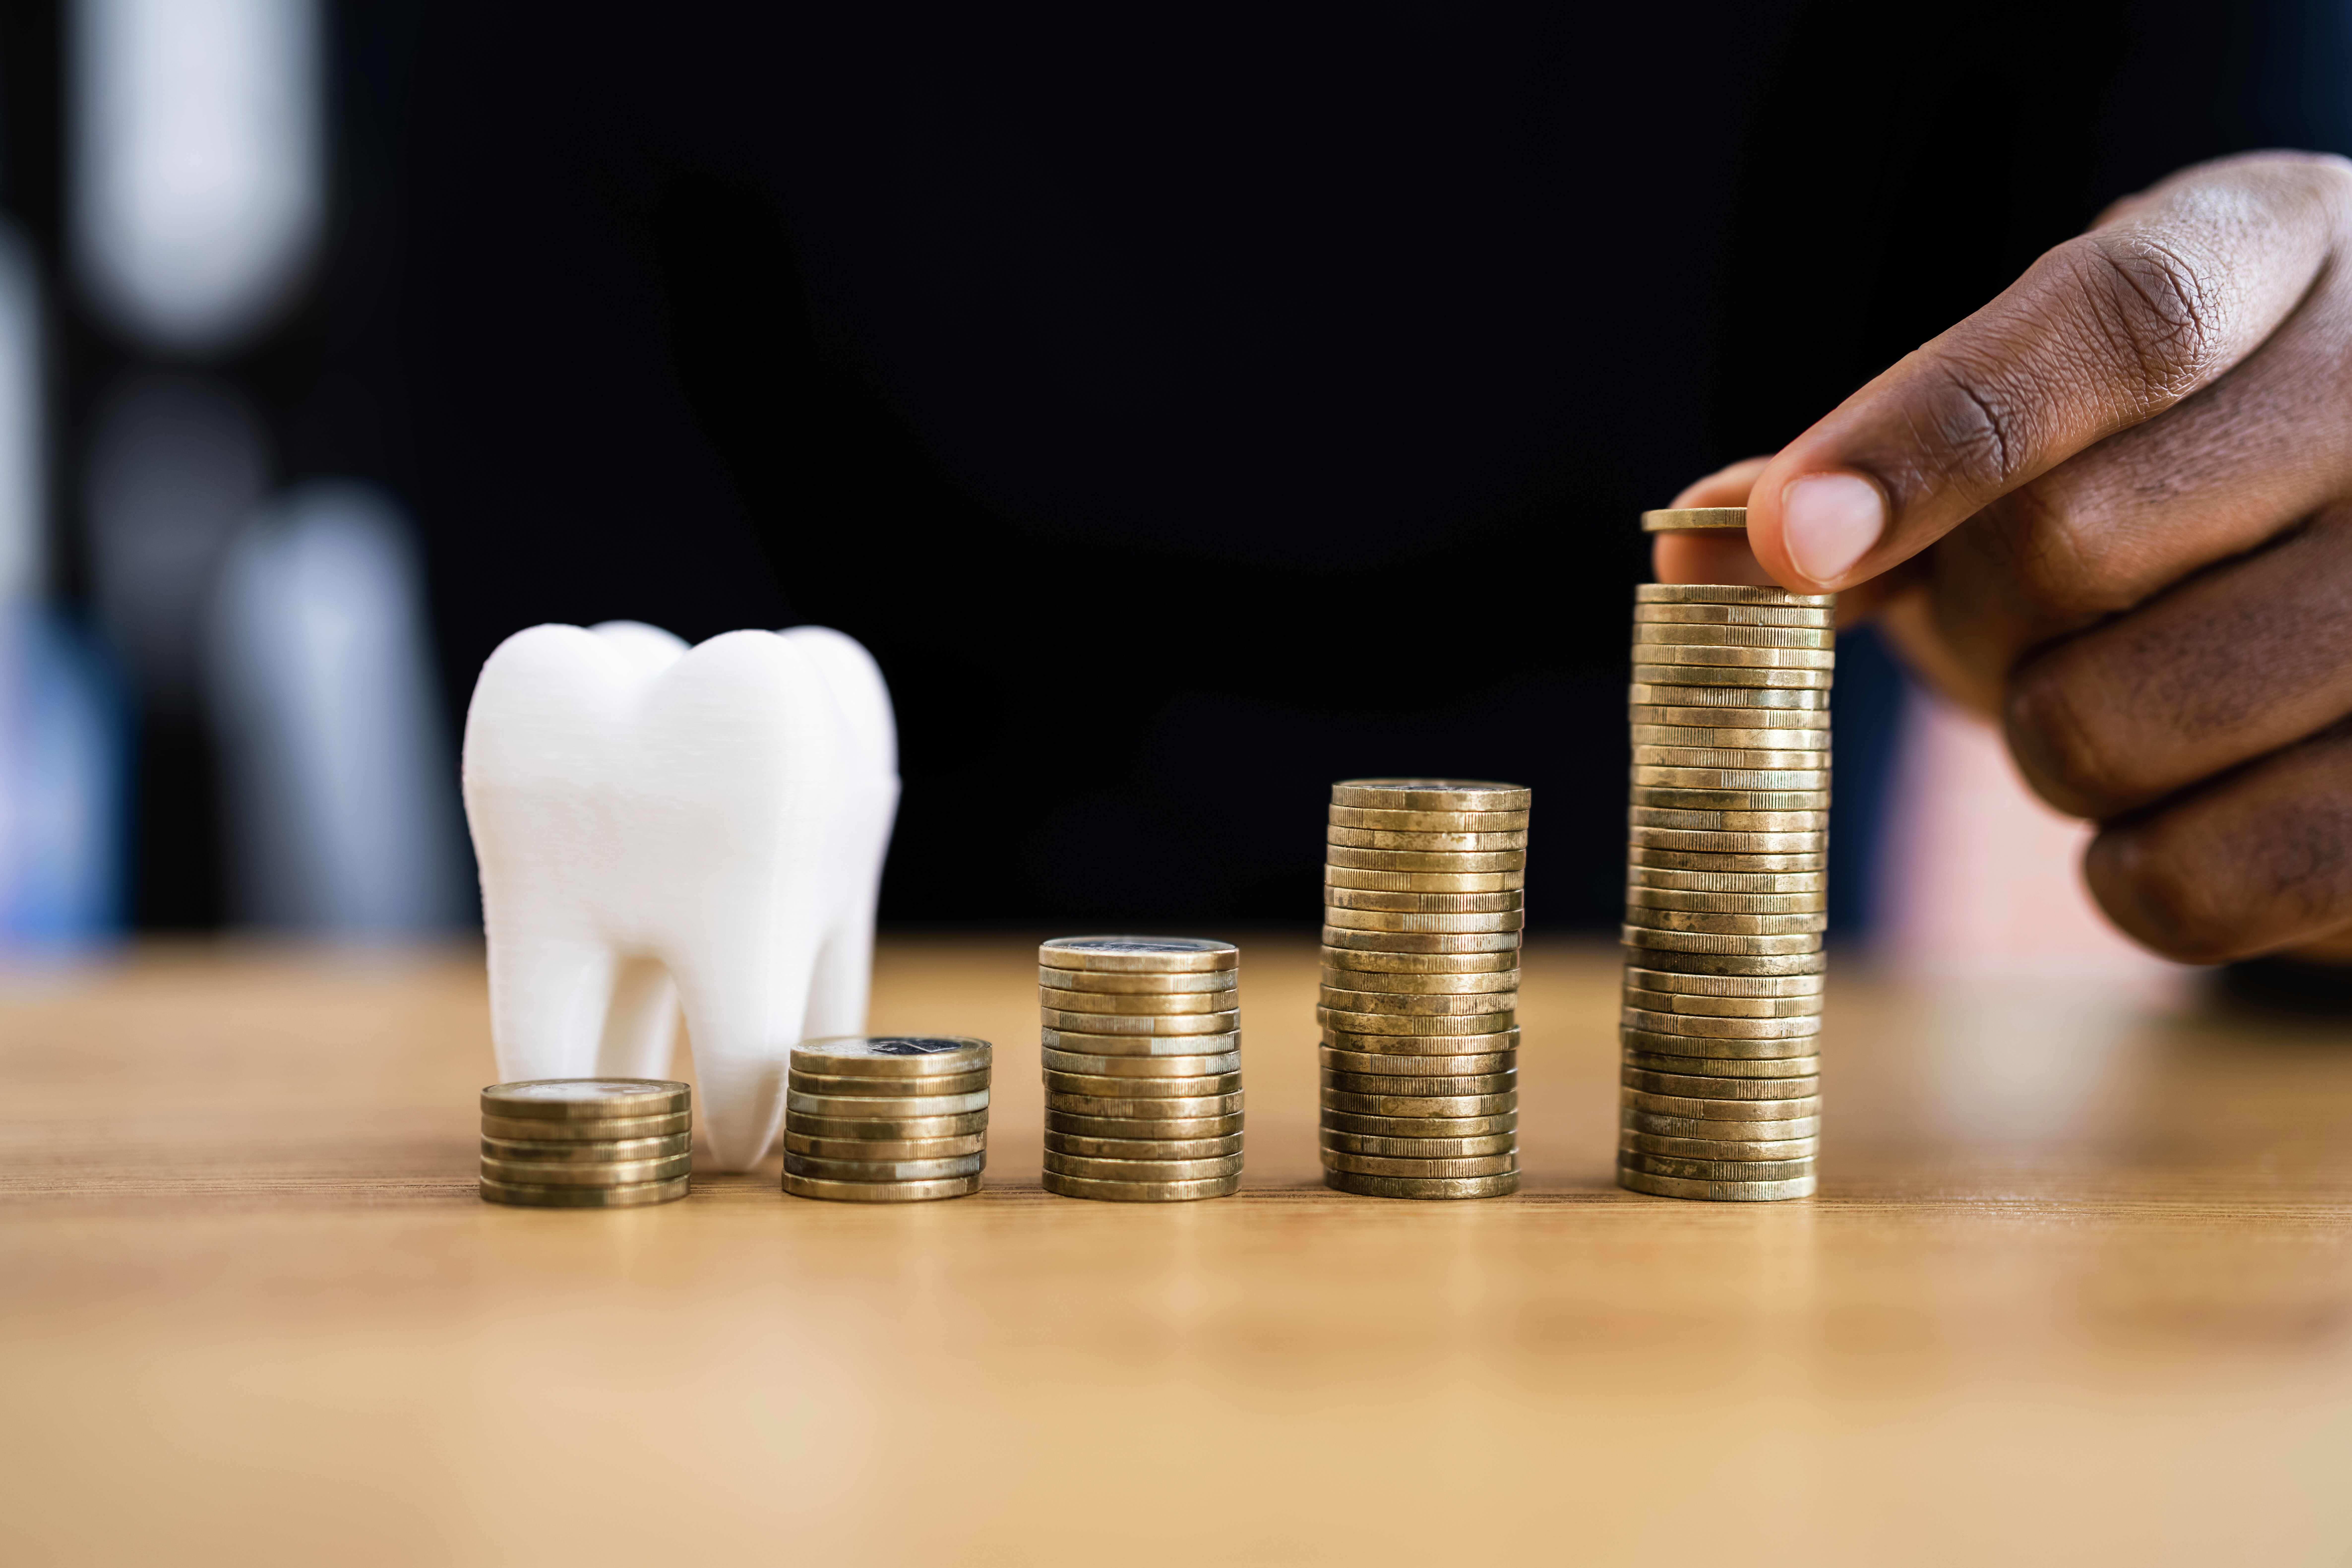 Dental Tooth Insurance And Dentistry Service Money